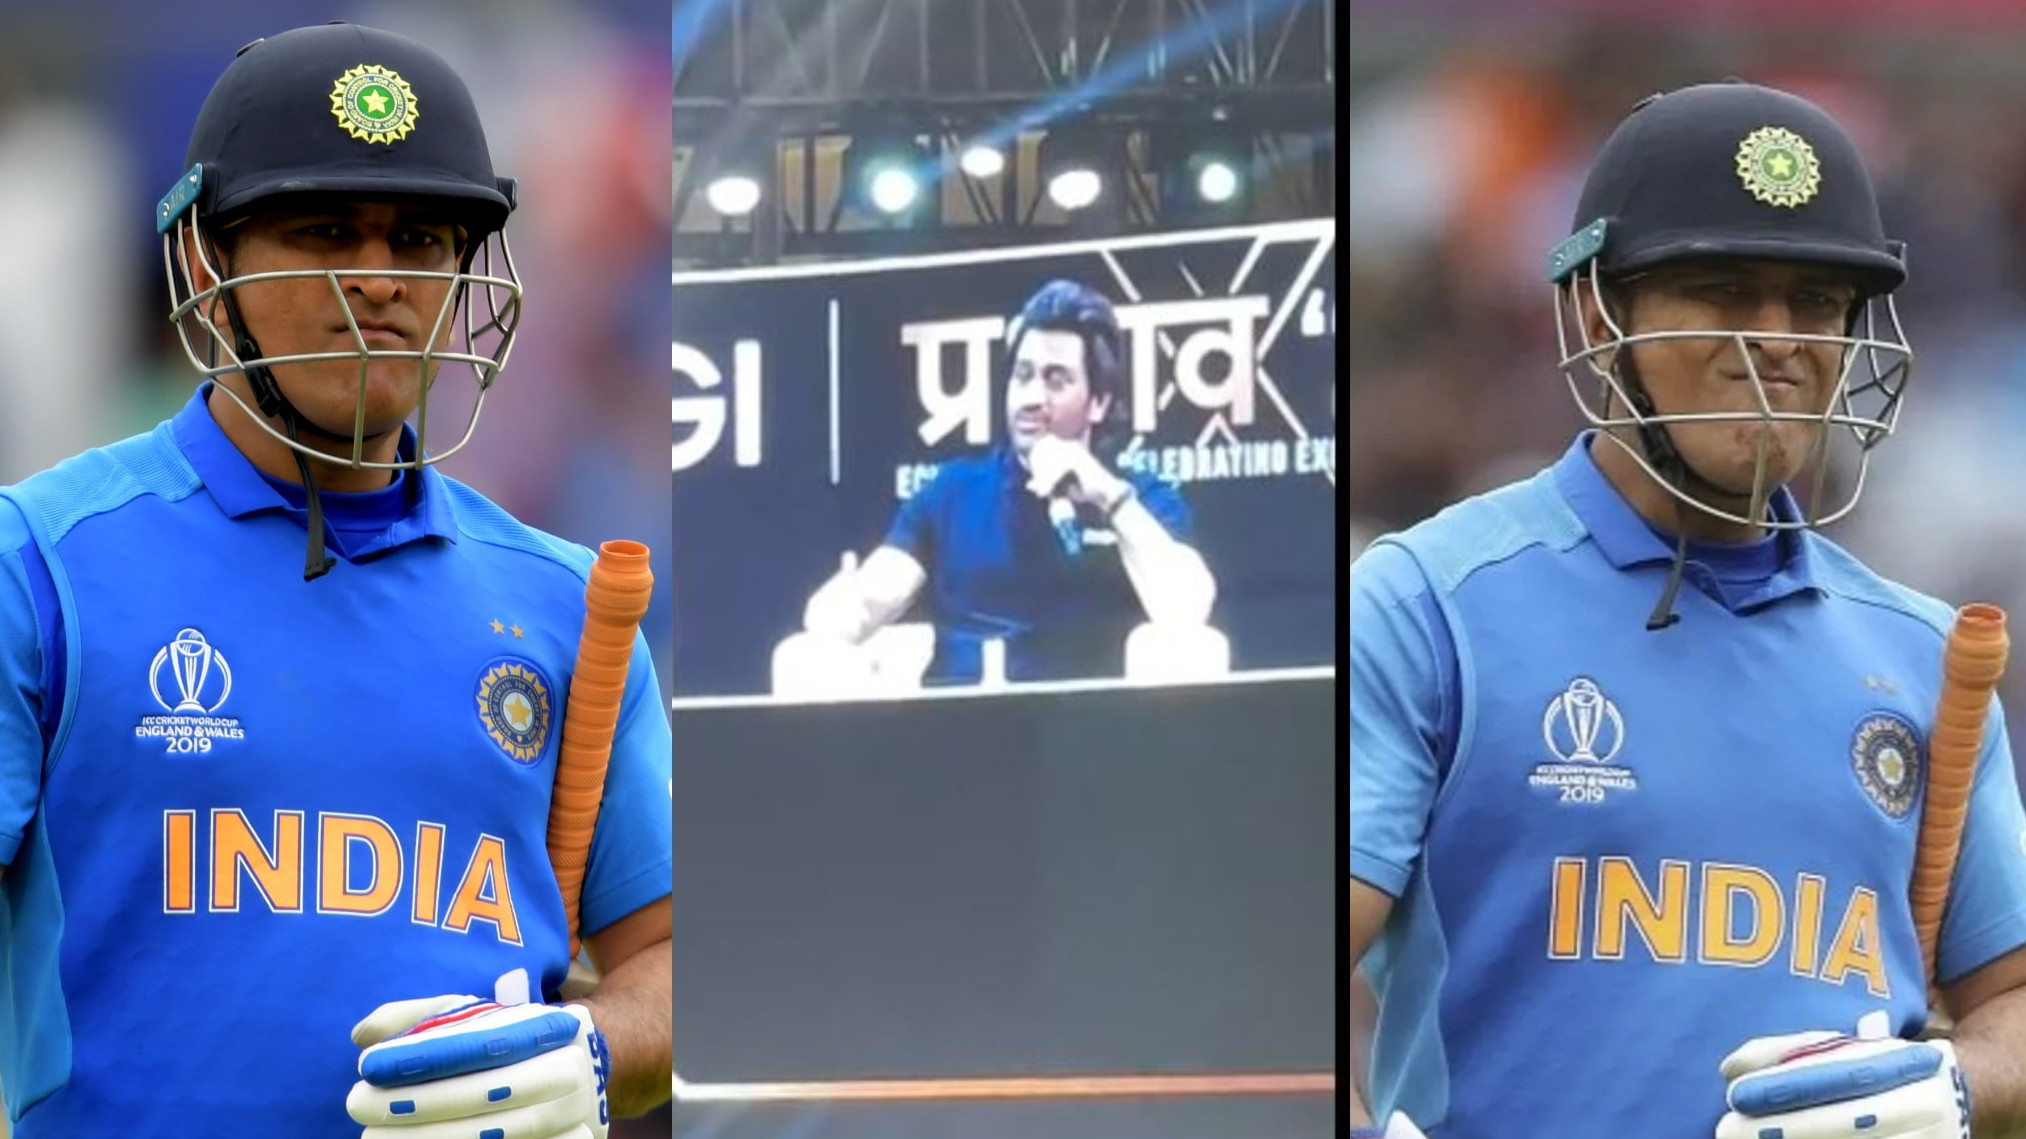 WATCH- “Difficult to control emotions”- MS Dhoni on whether he cried after India’s 2019 WC semi-final loss